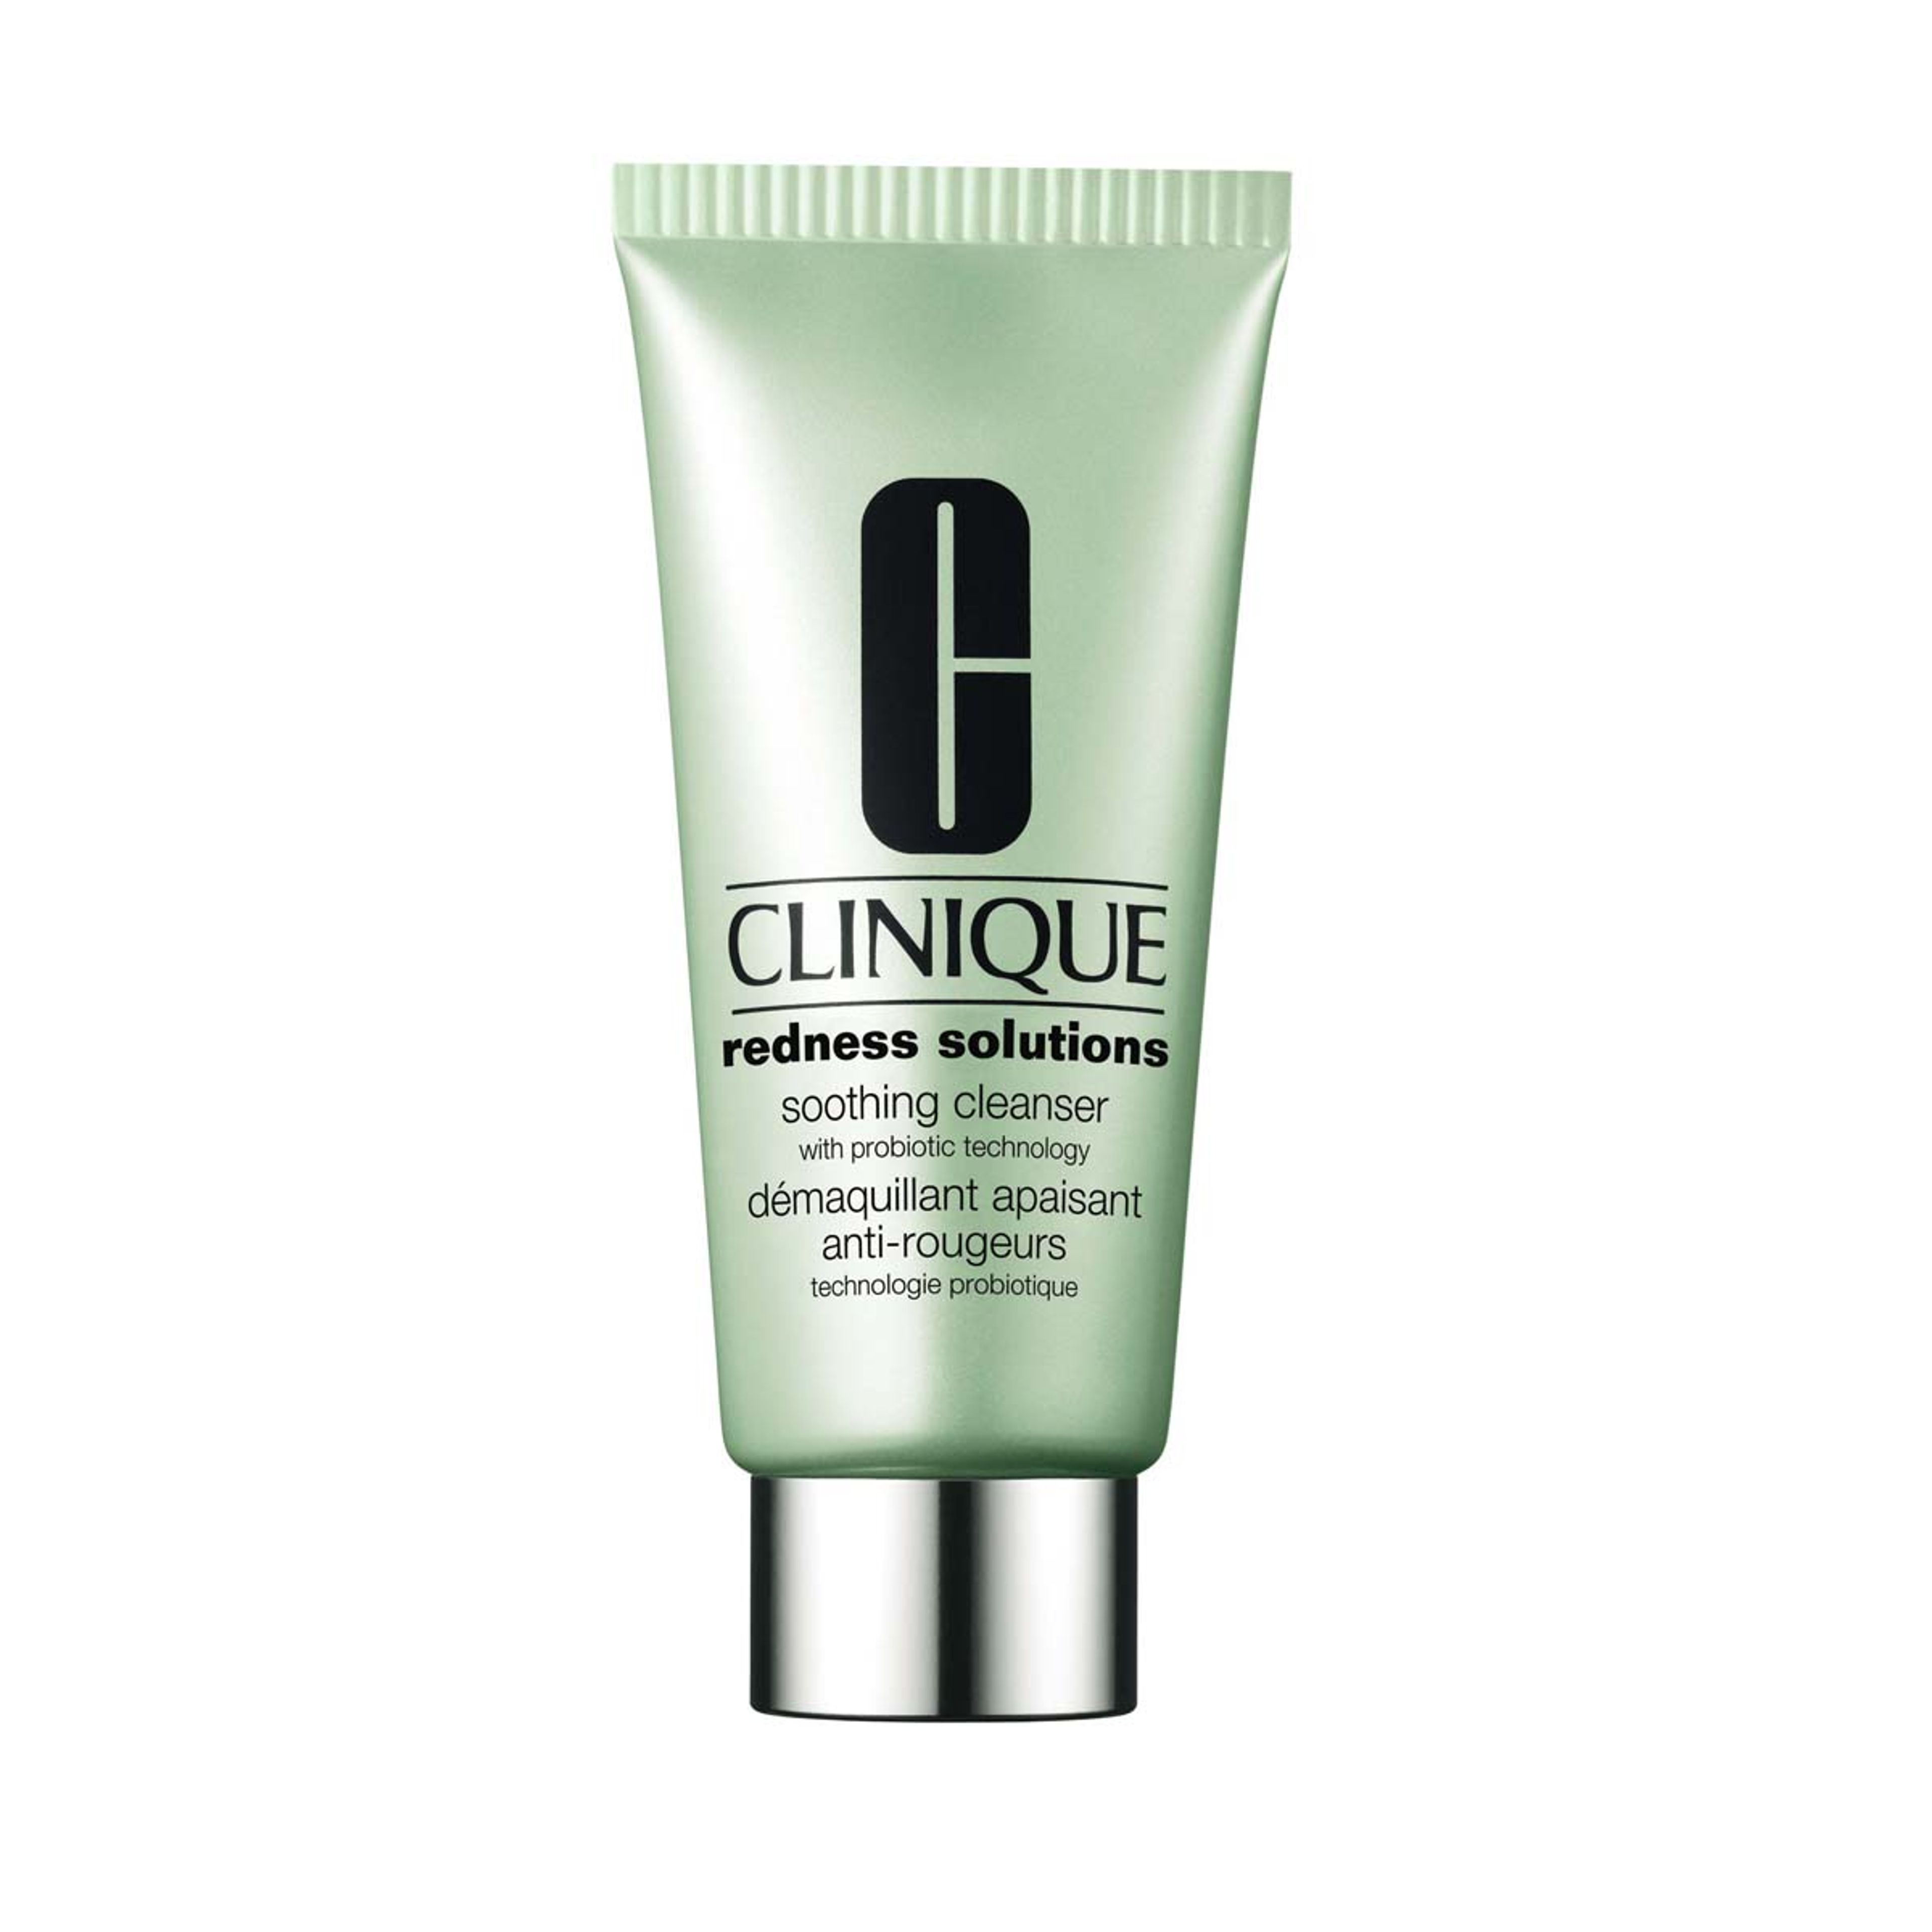 Clinique Soothing Cleanser 1